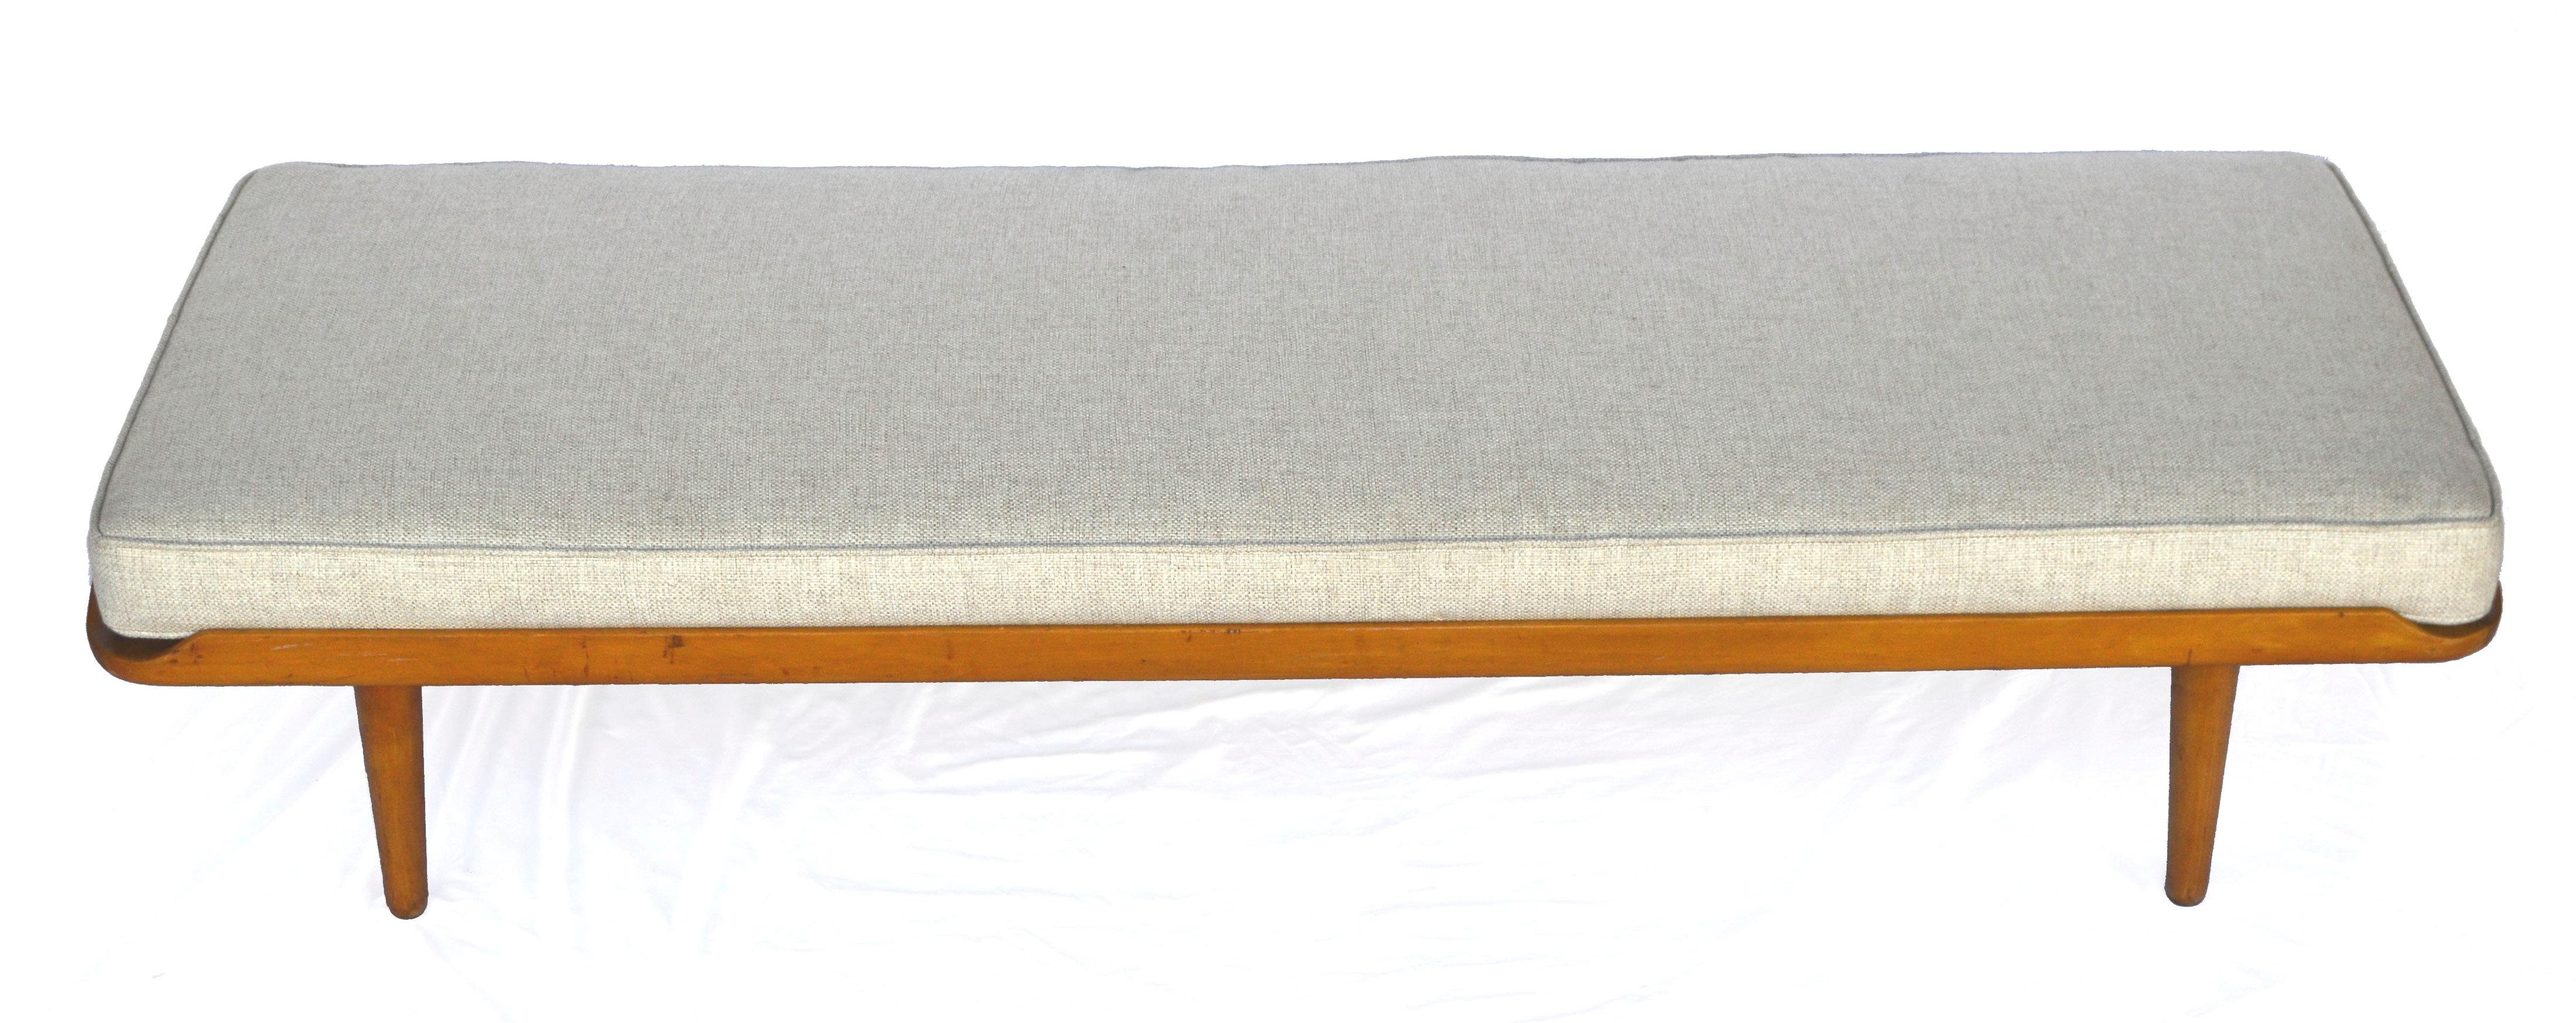 Clean and elegant daybed by Grete Juel Jalk (Denmark, 1920–2006) for Bovirke Furniture Denmark. Designed and manufactured in Copenhagen, Denmark. Includes a reproduction cushion in the original style. Grete Juel Jalk (1920–2006) was a Danish